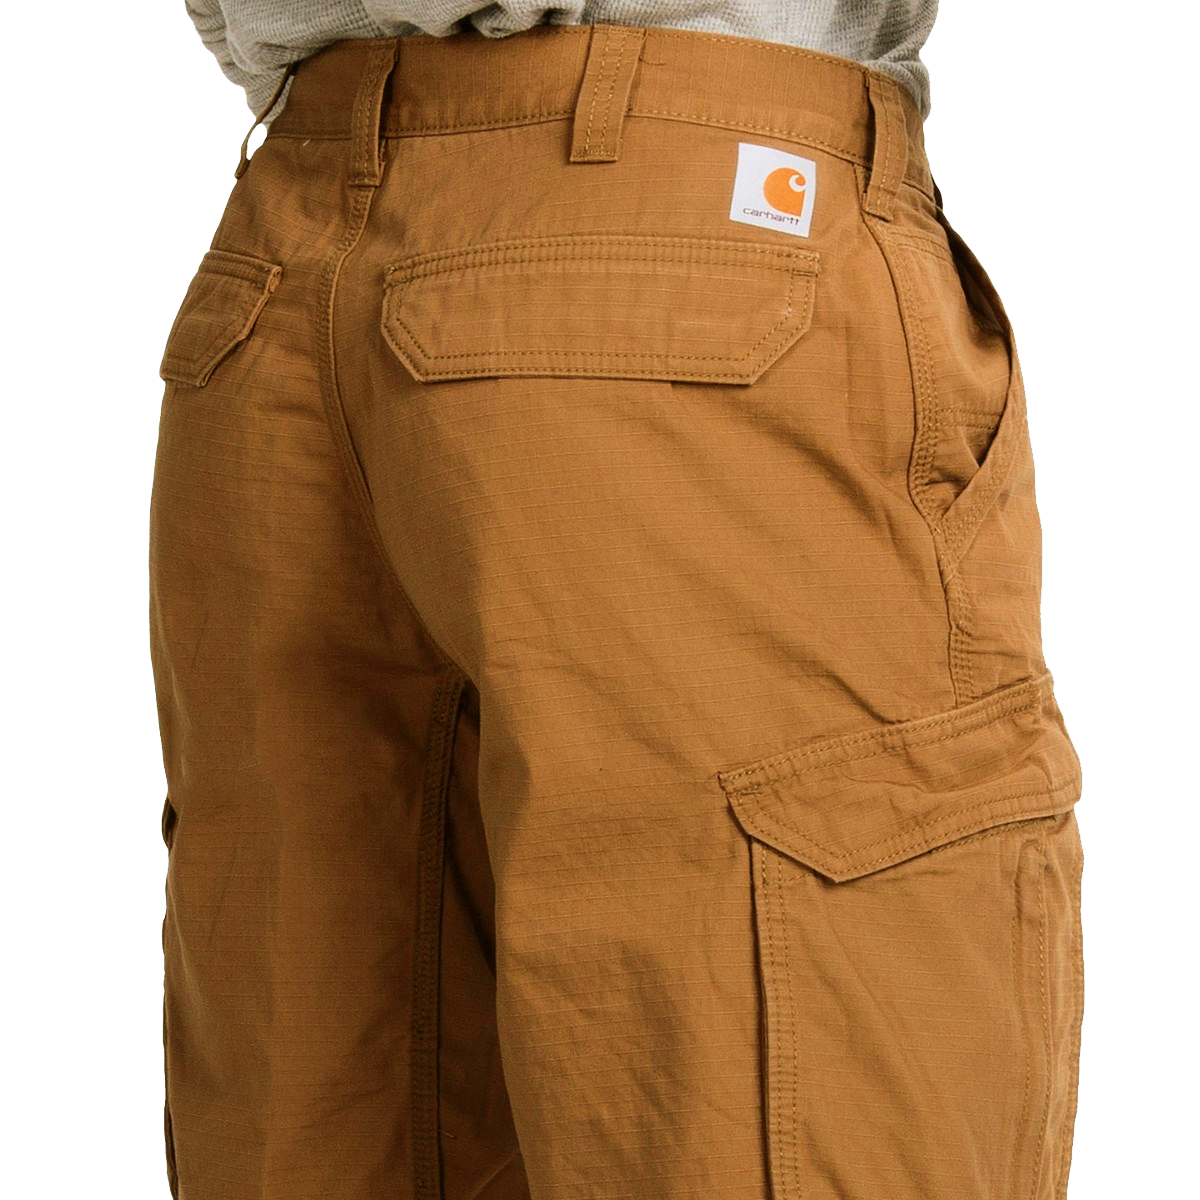 Relaxed Fit Ripstop Cargo Work Short alternate view